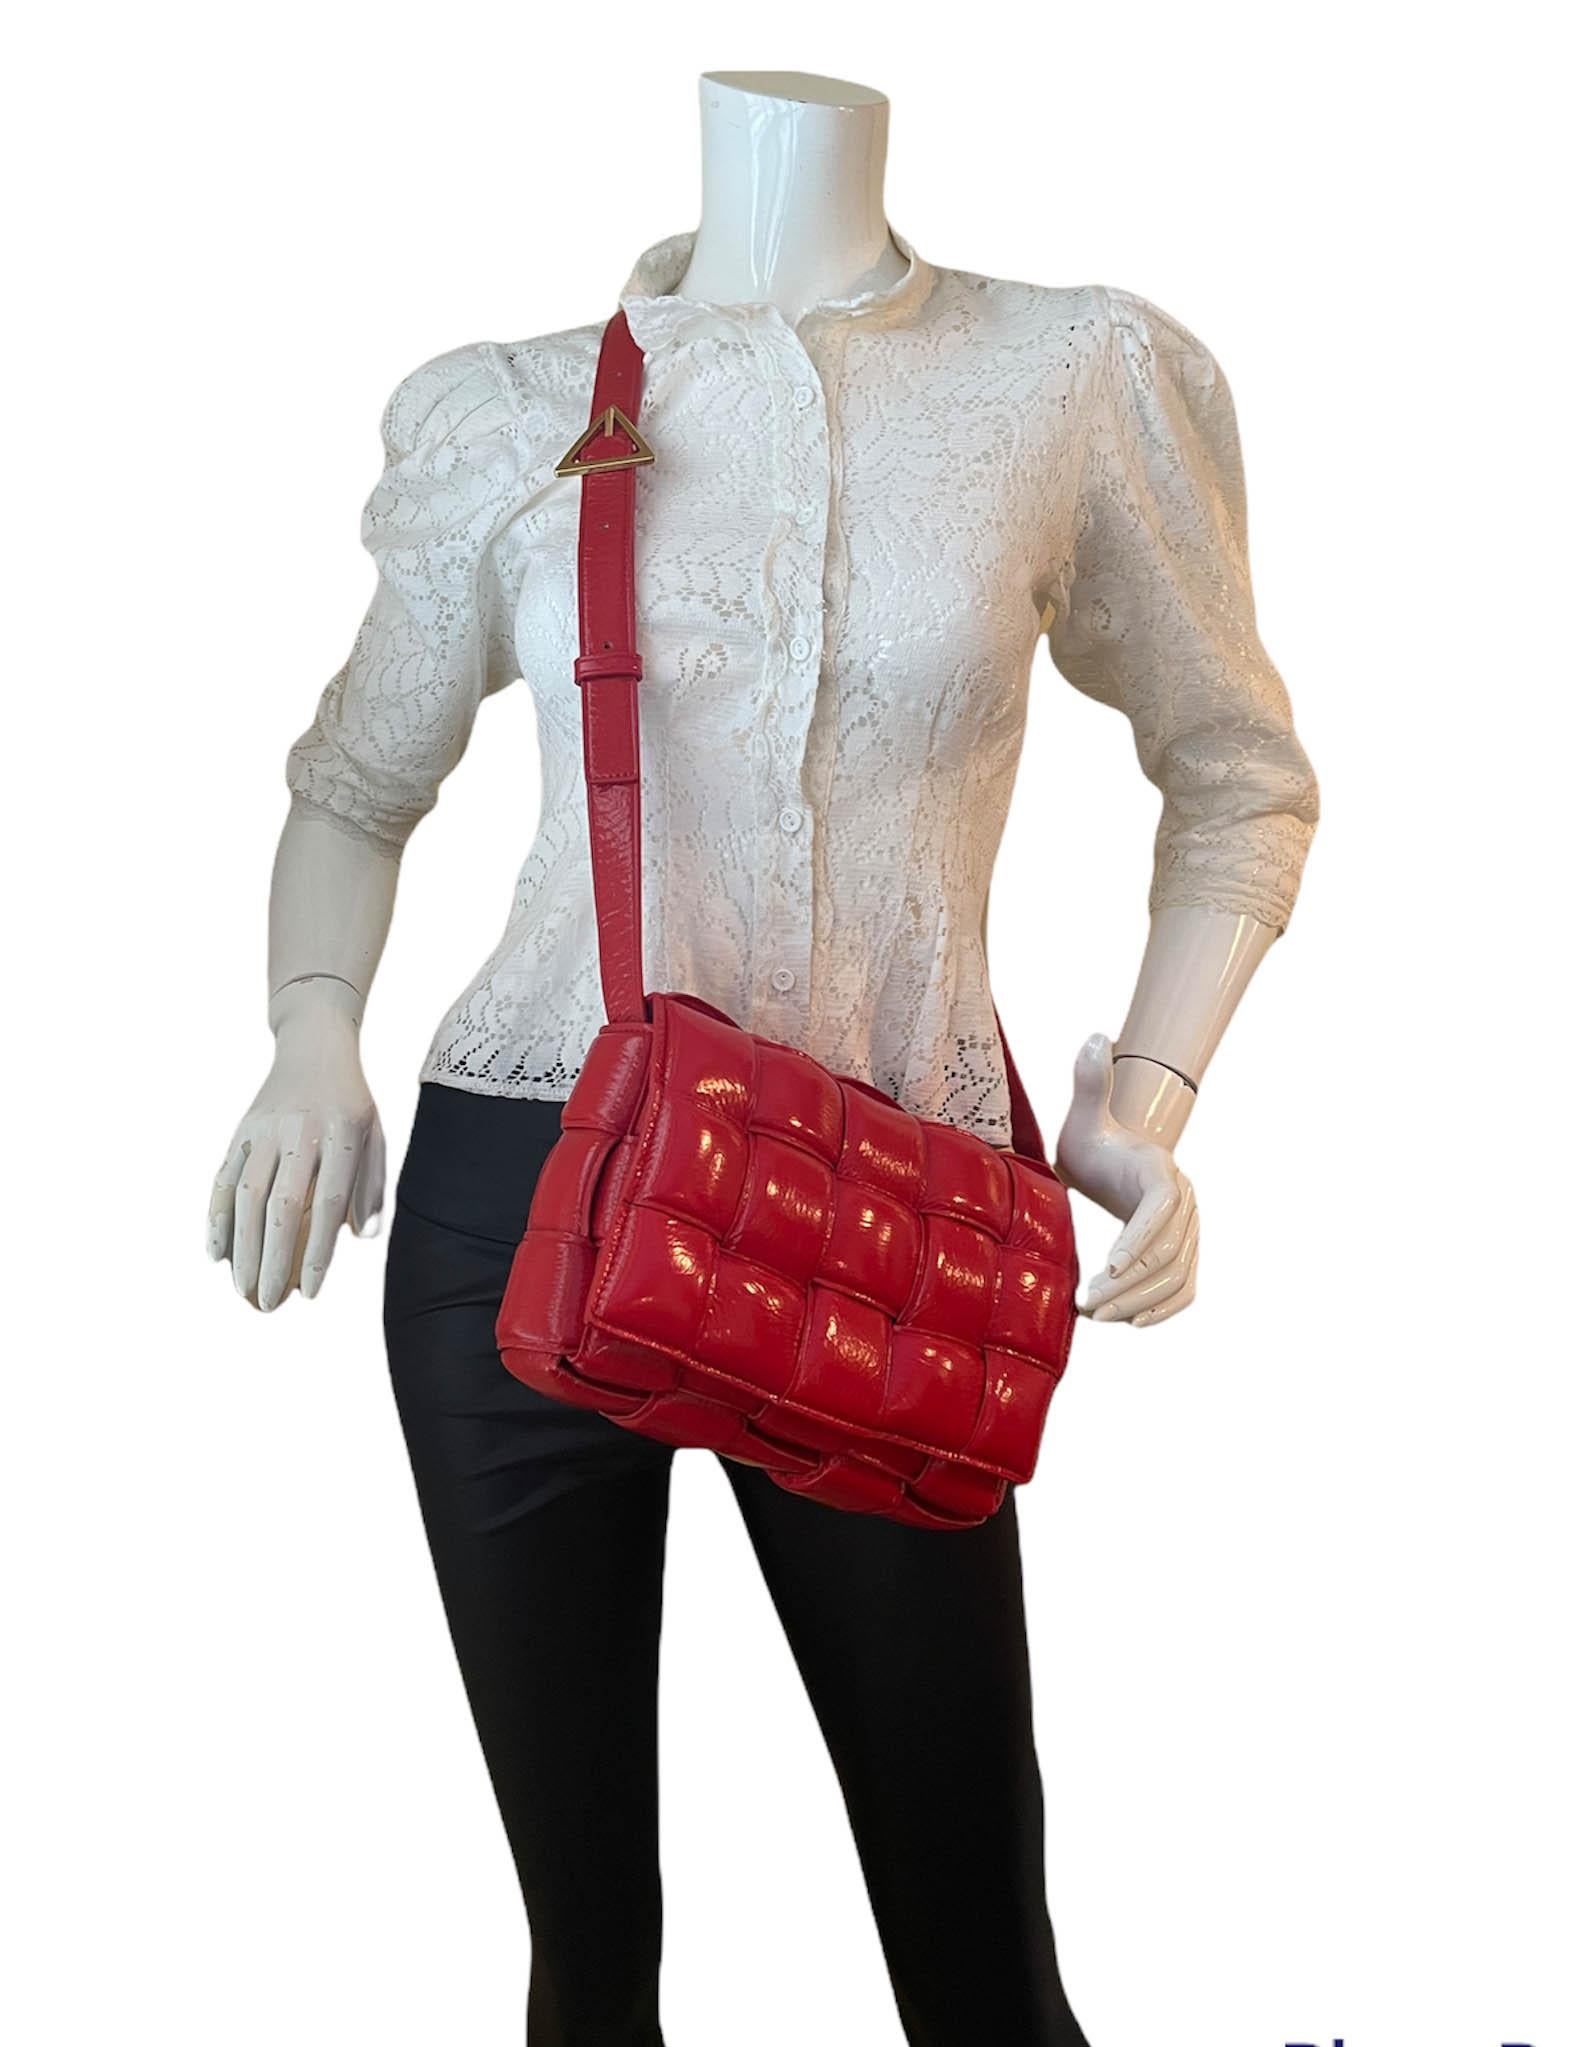 Bottega Veneta BV Chili Red Textured Deerskin Maxi Intrecciato Padded Cassette Crossbody Bag

Made In: Italy
Year of Production: 2021
Color: Chili red
Hardware: Goldtone
Materials: Textured deerskin leather (similar to patent leather) and